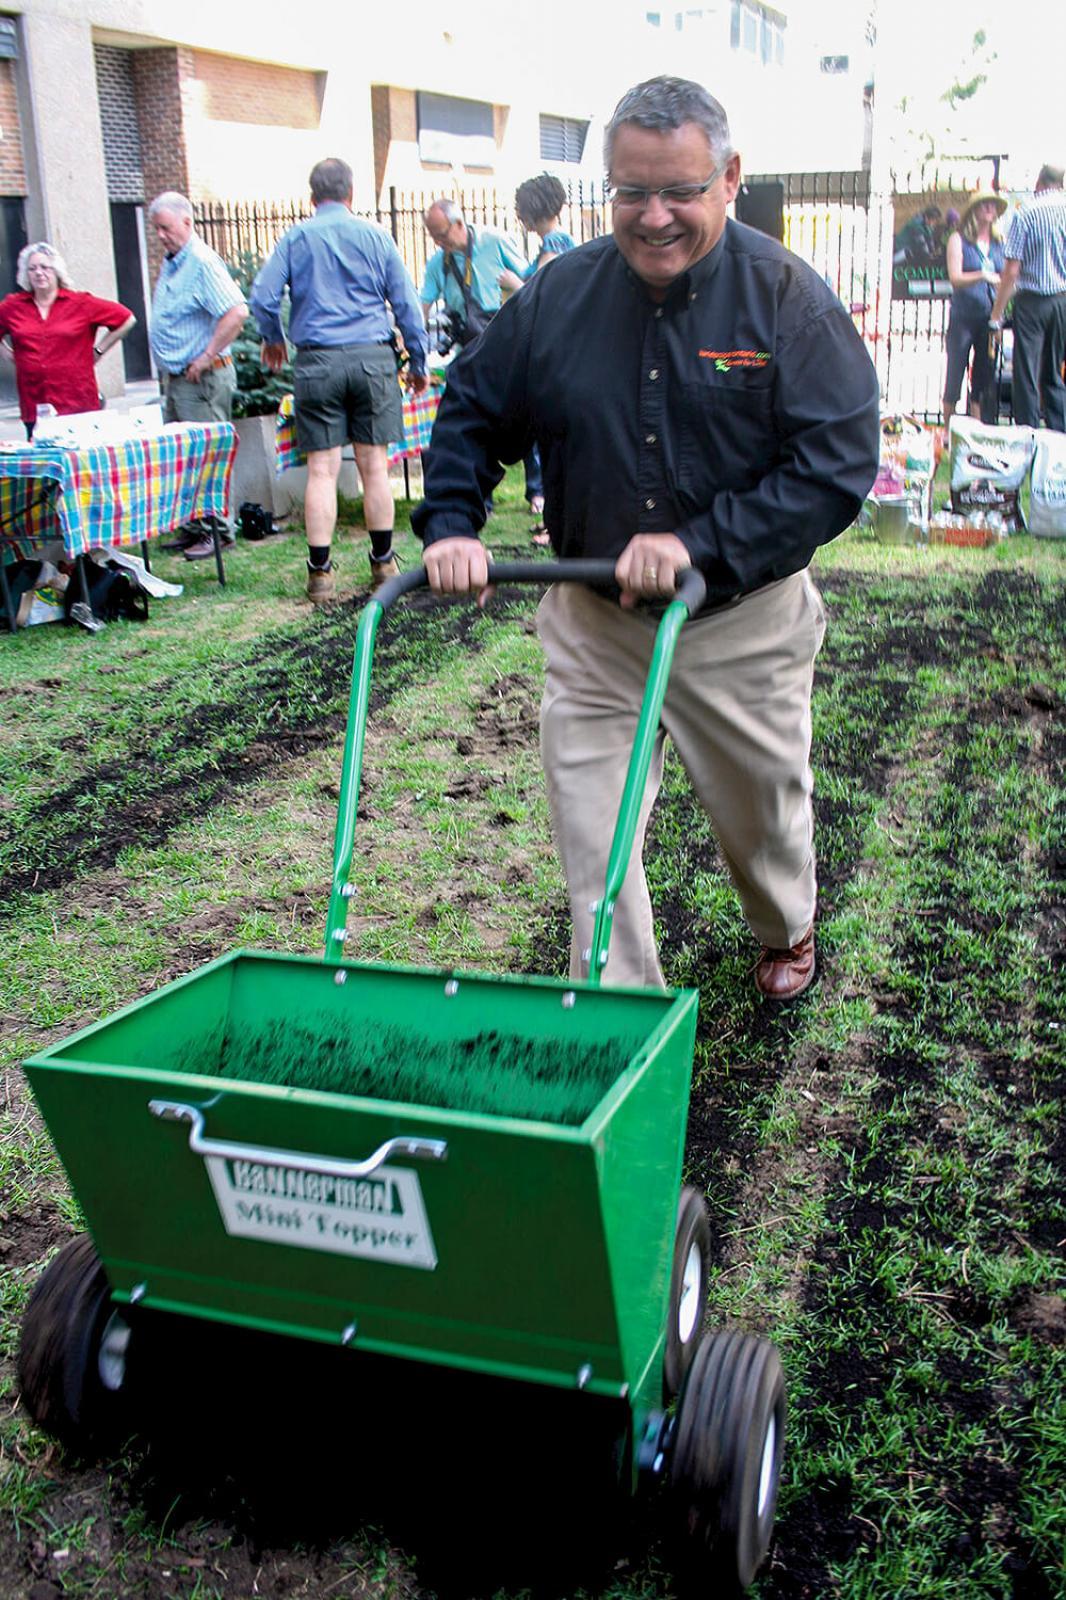 LO’s public relations director Denis Flanagan proved he is not just another pretty face, when he took on the task improving the soil at Compost Awareness Week at a site in downtown Toronto.